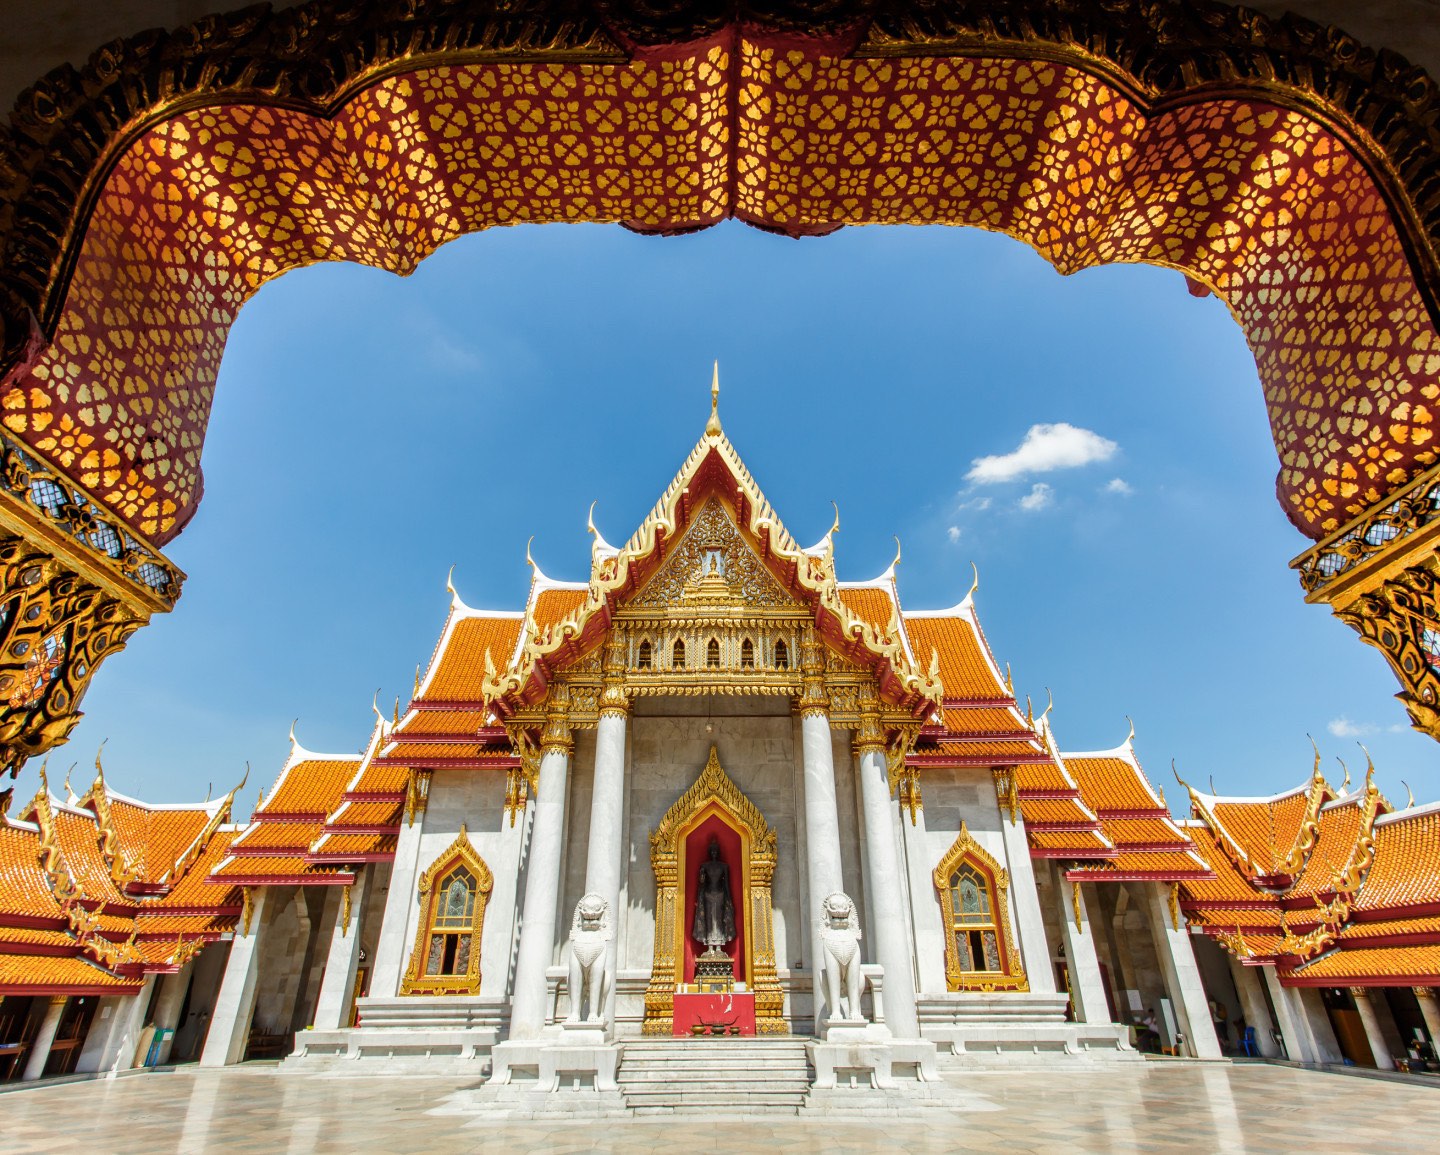 The gateway view of the Grand Palace in Bangkok, Thailand.